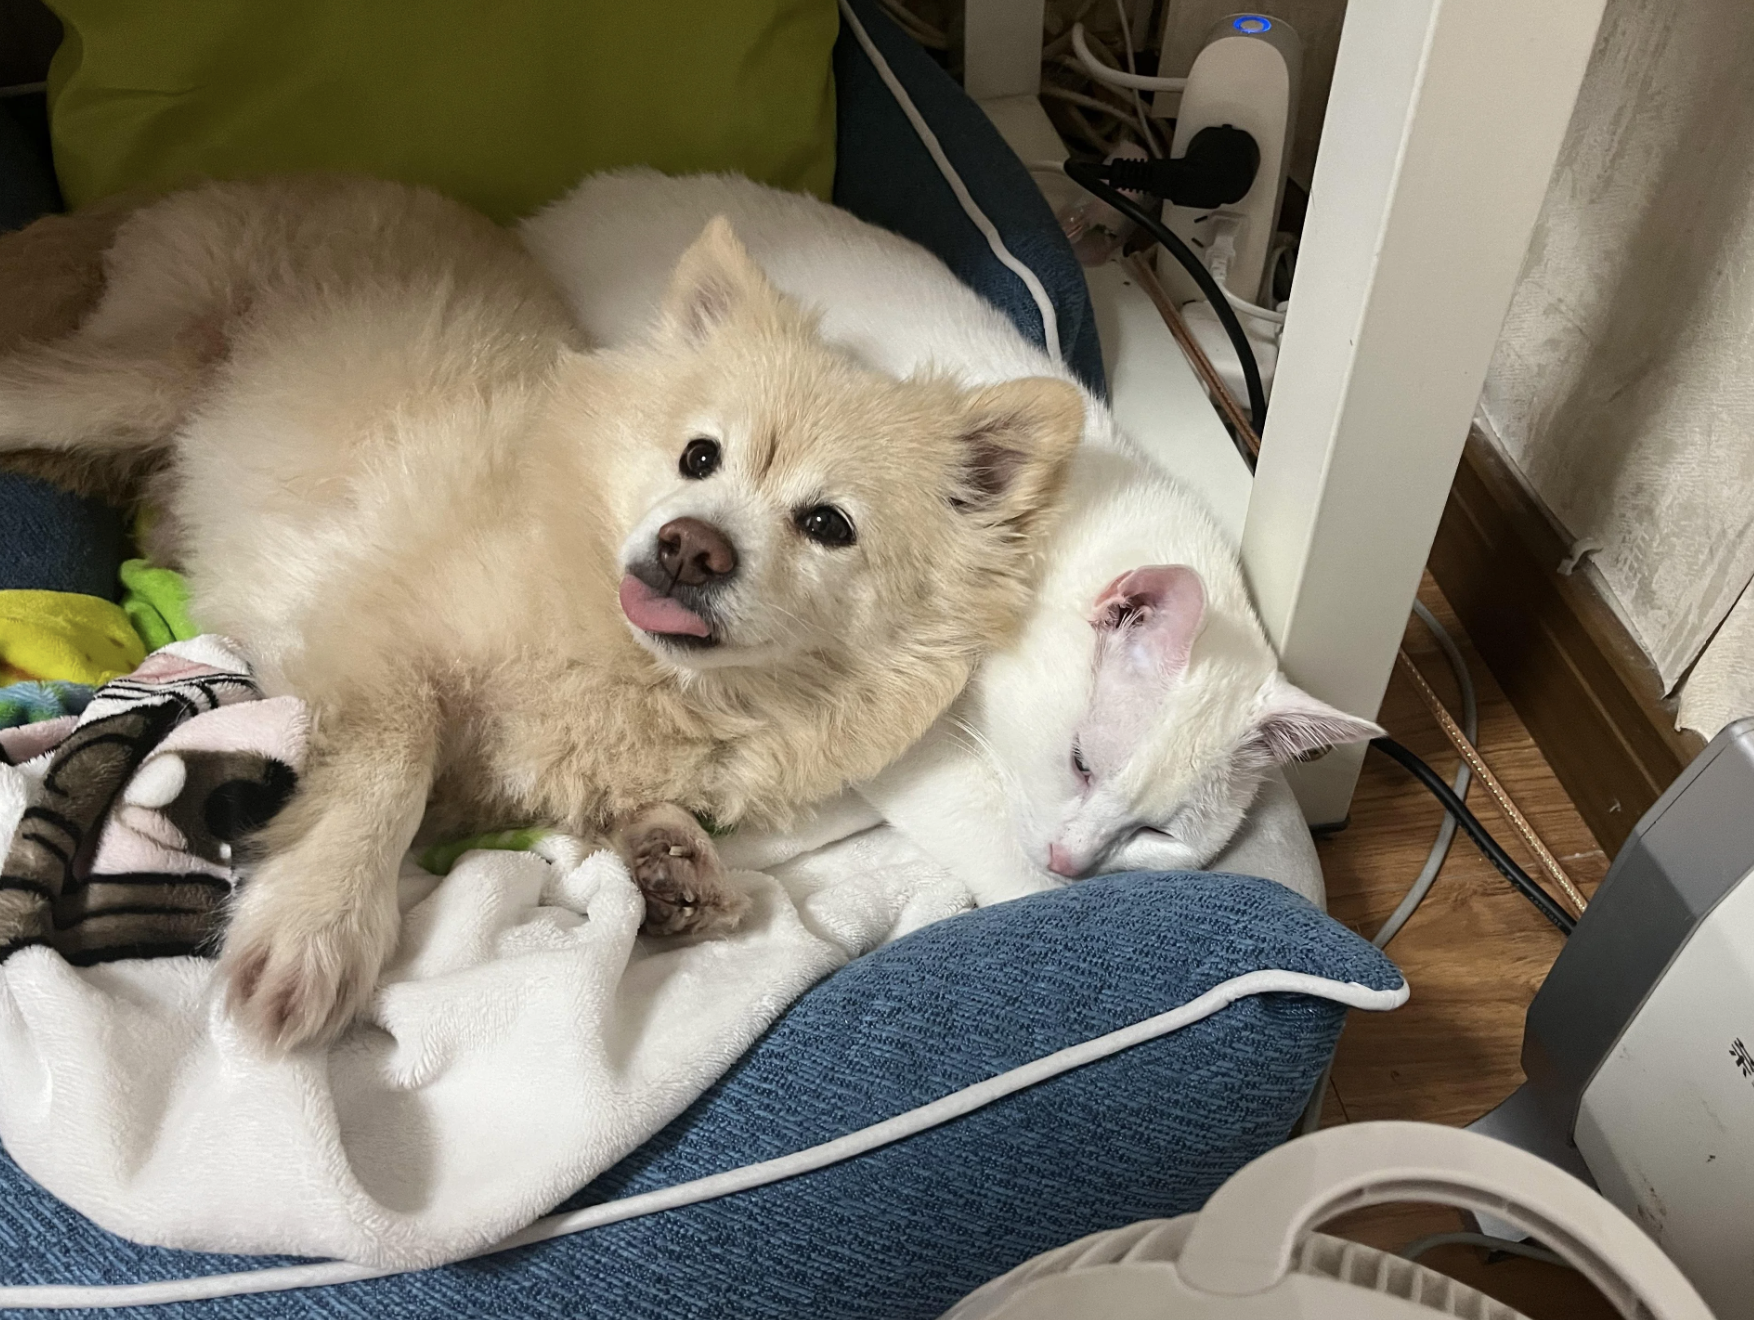 A dog and a cat lying close together on a cozy bed, with the cat resting its head on the dog